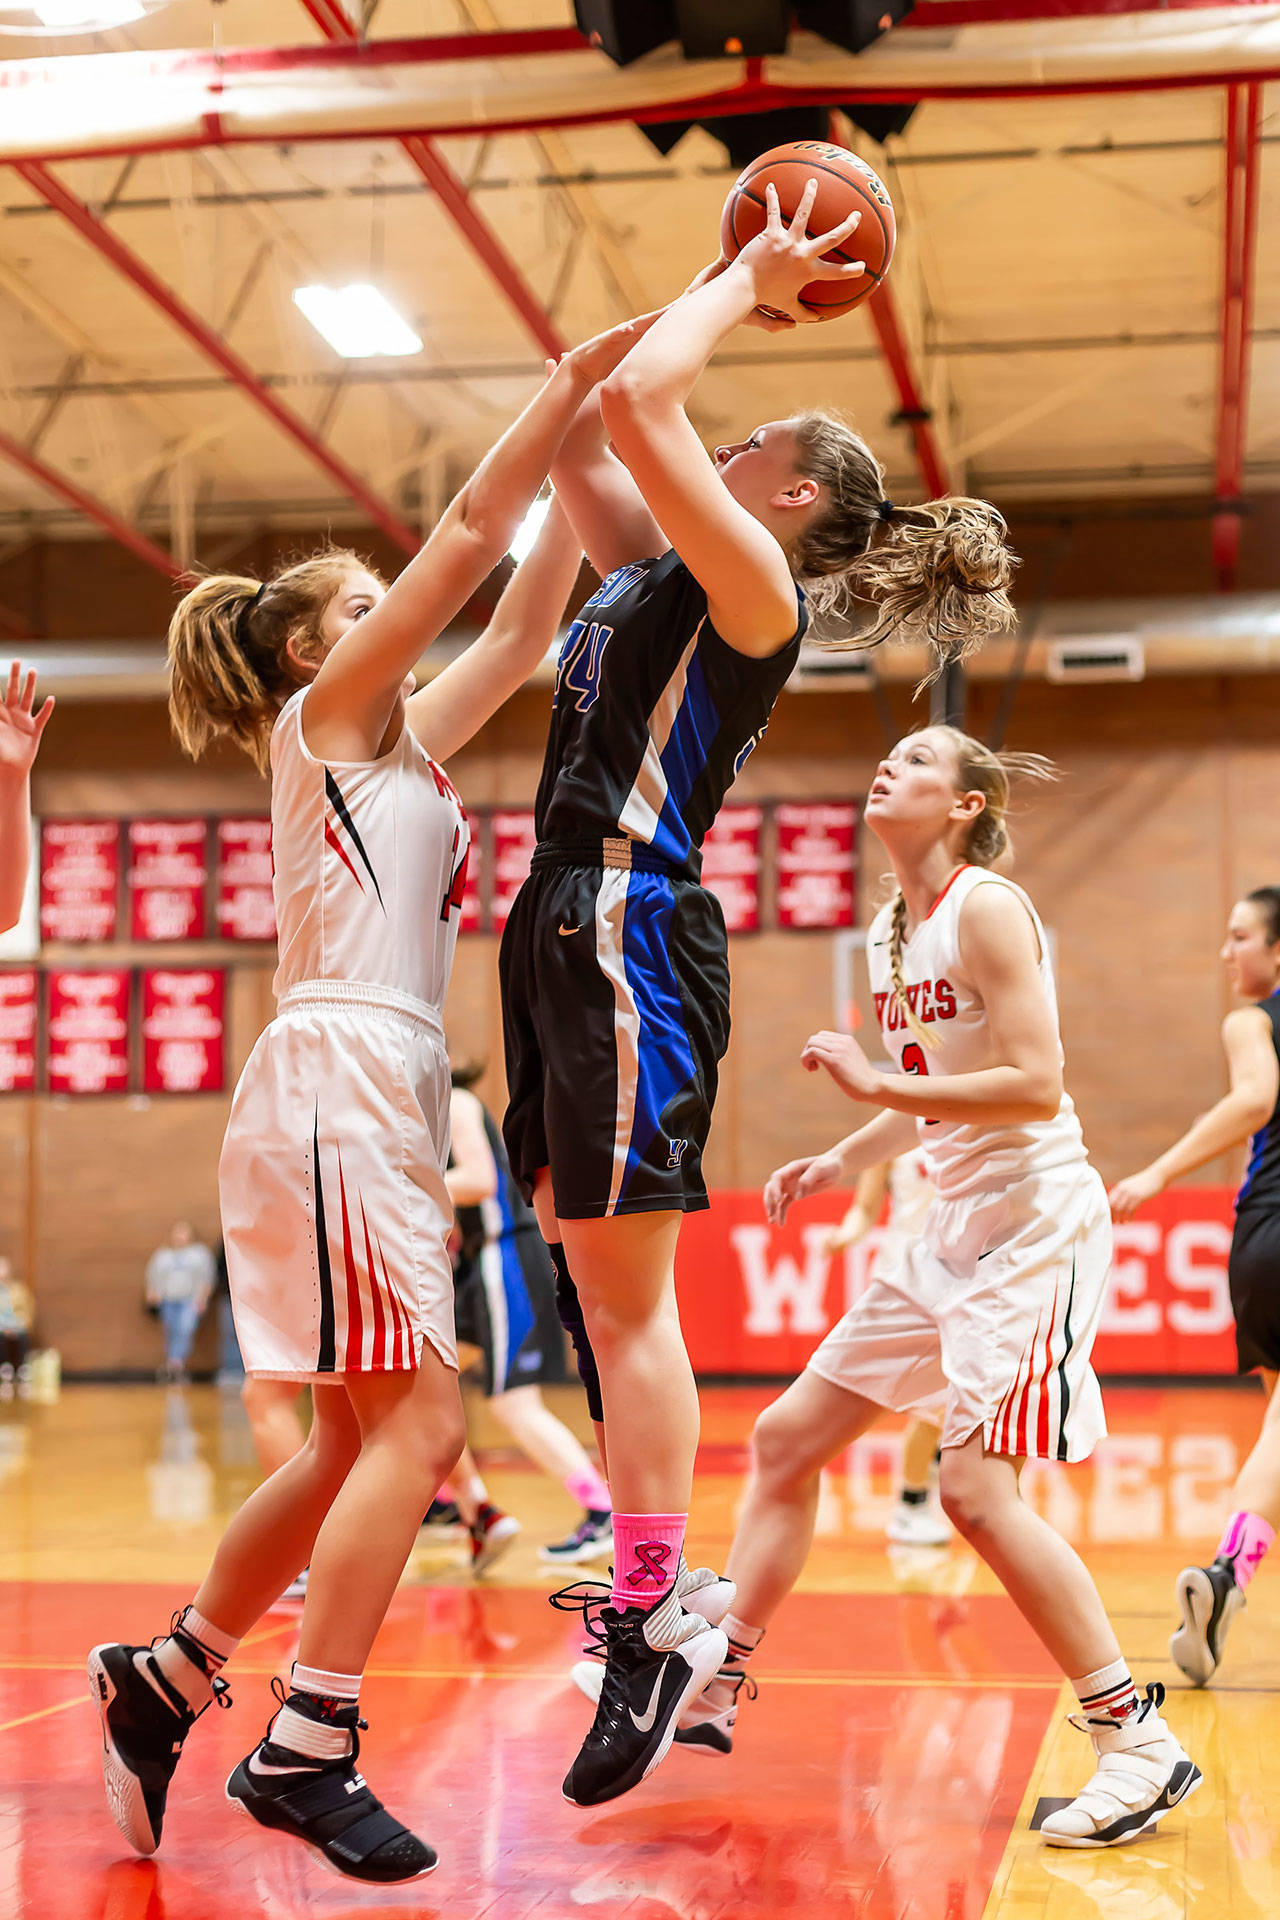 Emma Hodson puts up a jump shot against Coupeville this season. The sophomore was named to the league honorable mention list for her play this winter. (Photo by John Fisken)